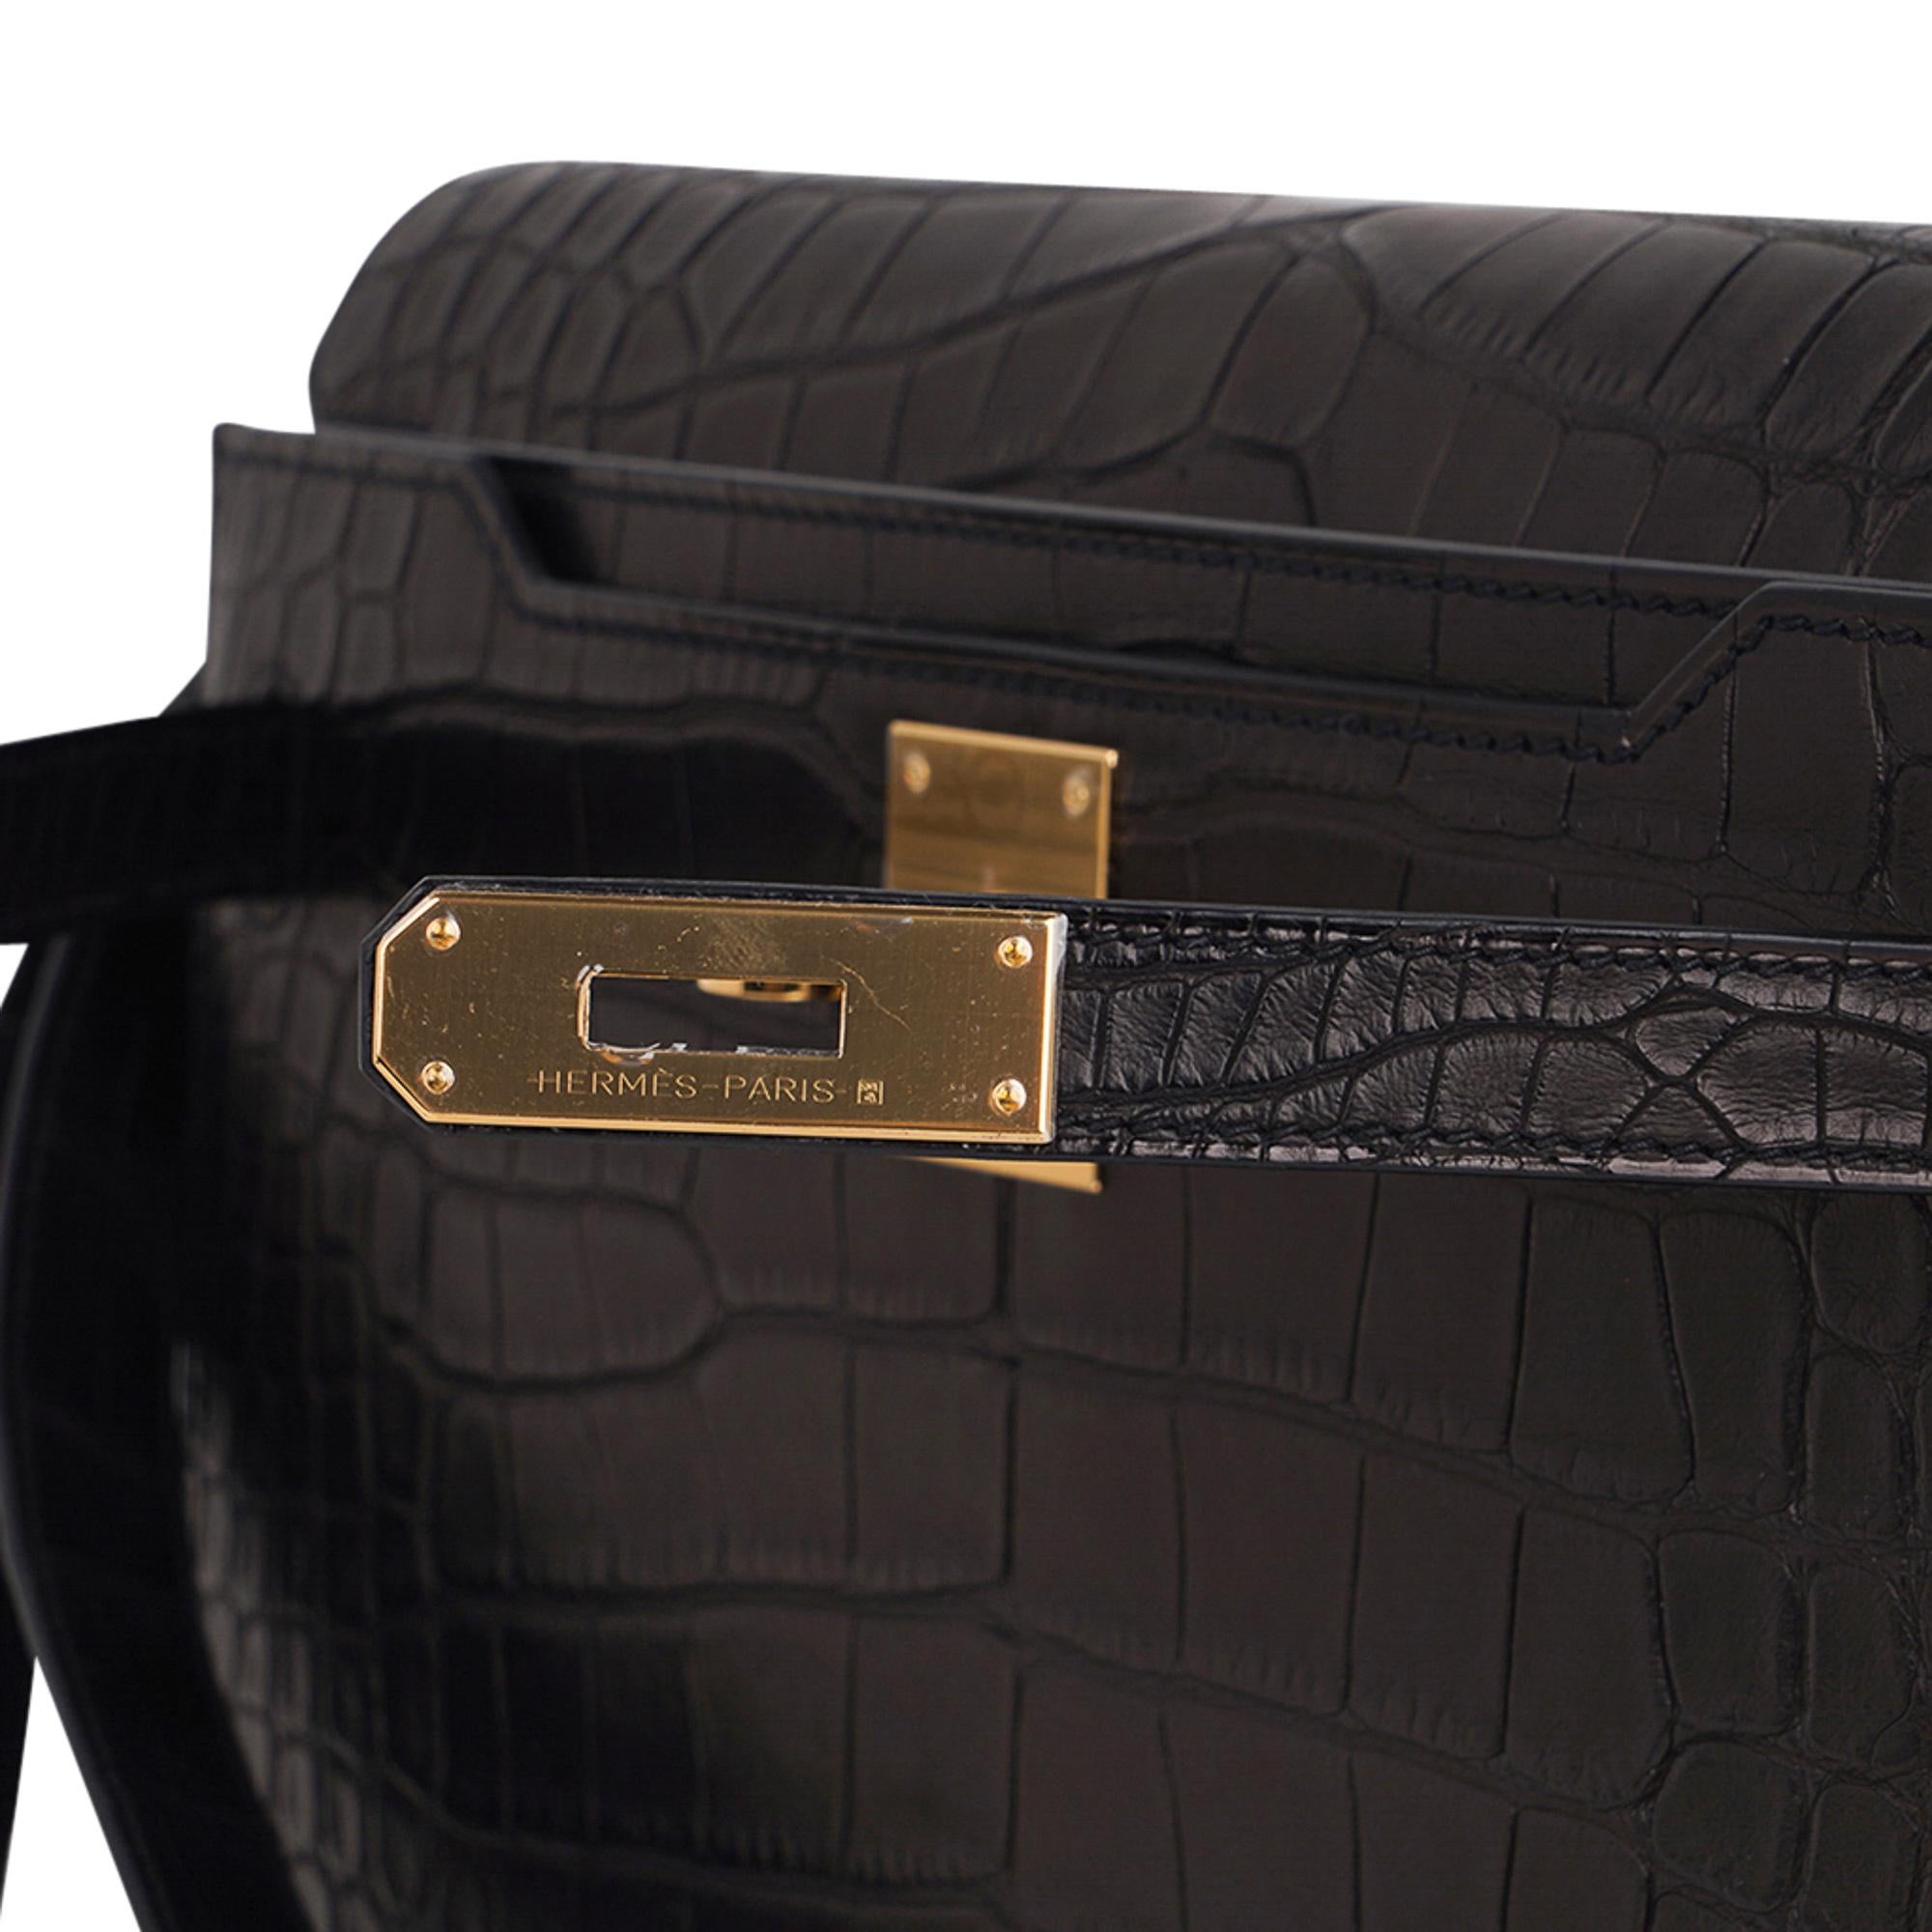 Guaranteed authentic men's Hermes Kelly Depeches 25 Pouch featured in Black matte Alligator.
Fabulous unisex Hermes clutch that is perfect for day to evening wear.
Lush with Gold hardware.
Pouch opens to a divided compartment.
Lanyard is